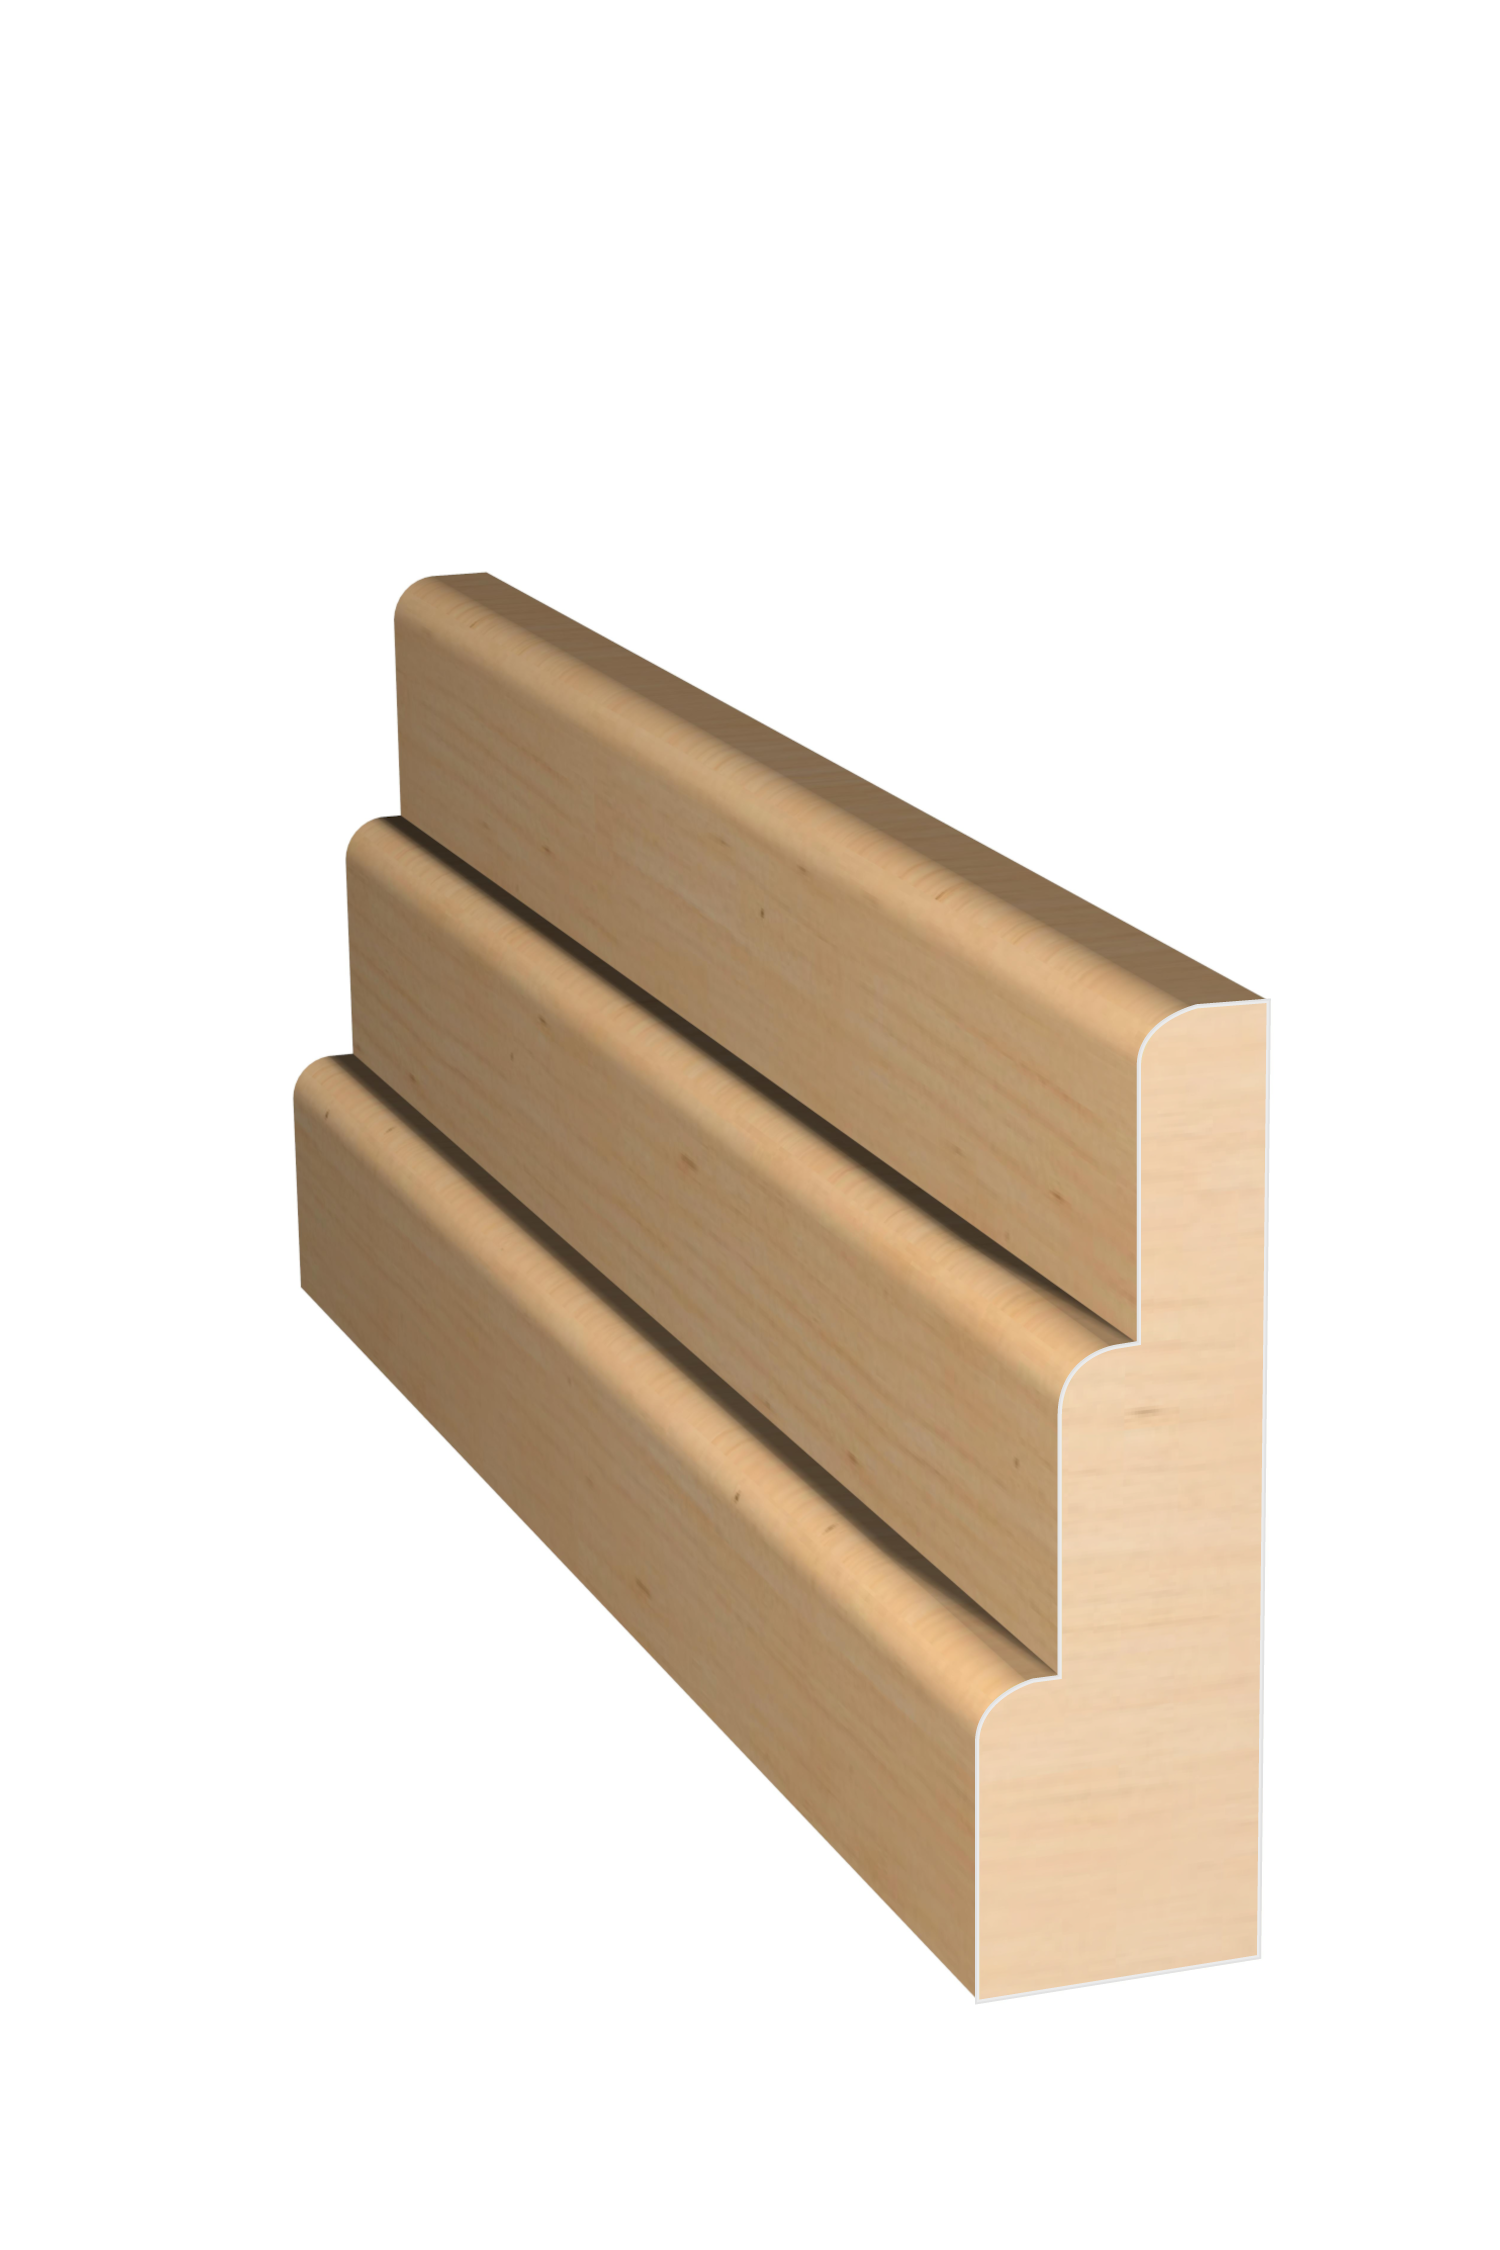 Three dimensional rendering of custom casing wood molding CAPL21418 made by Public Lumber Company in Detroit.